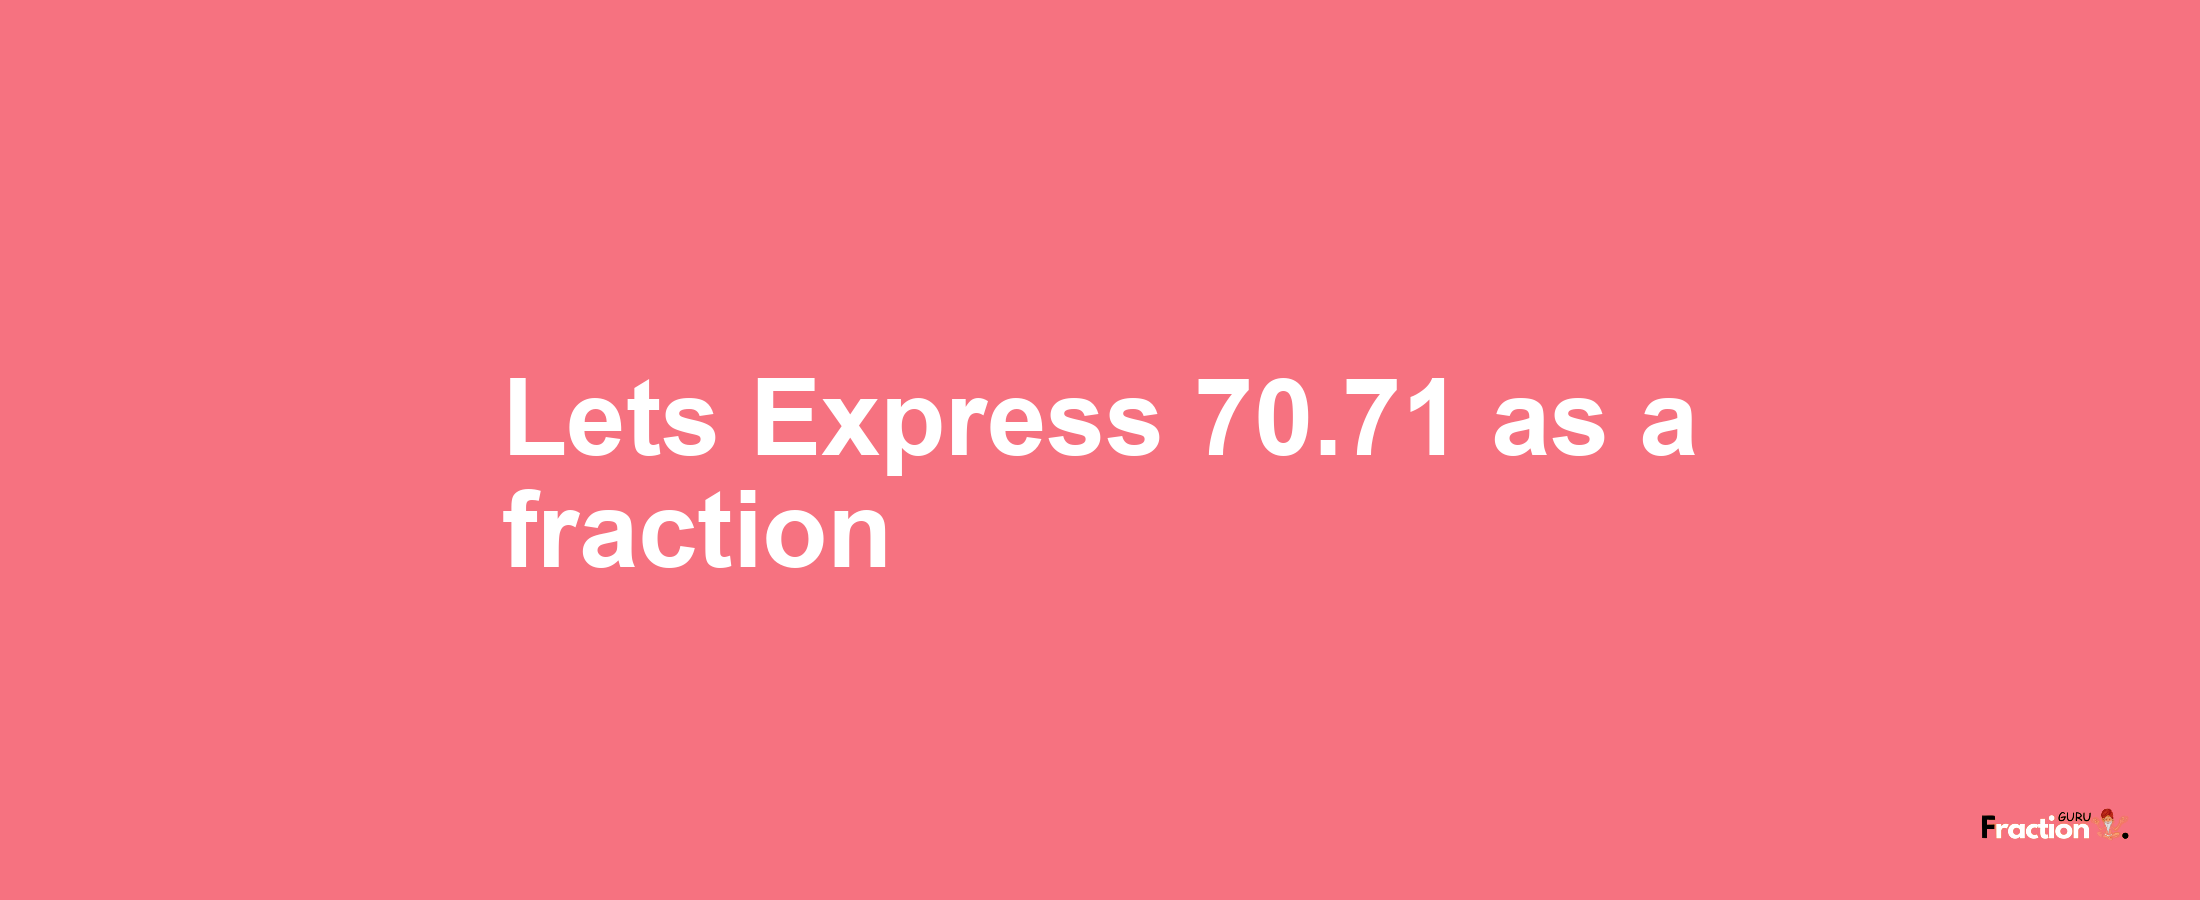 Lets Express 70.71 as afraction